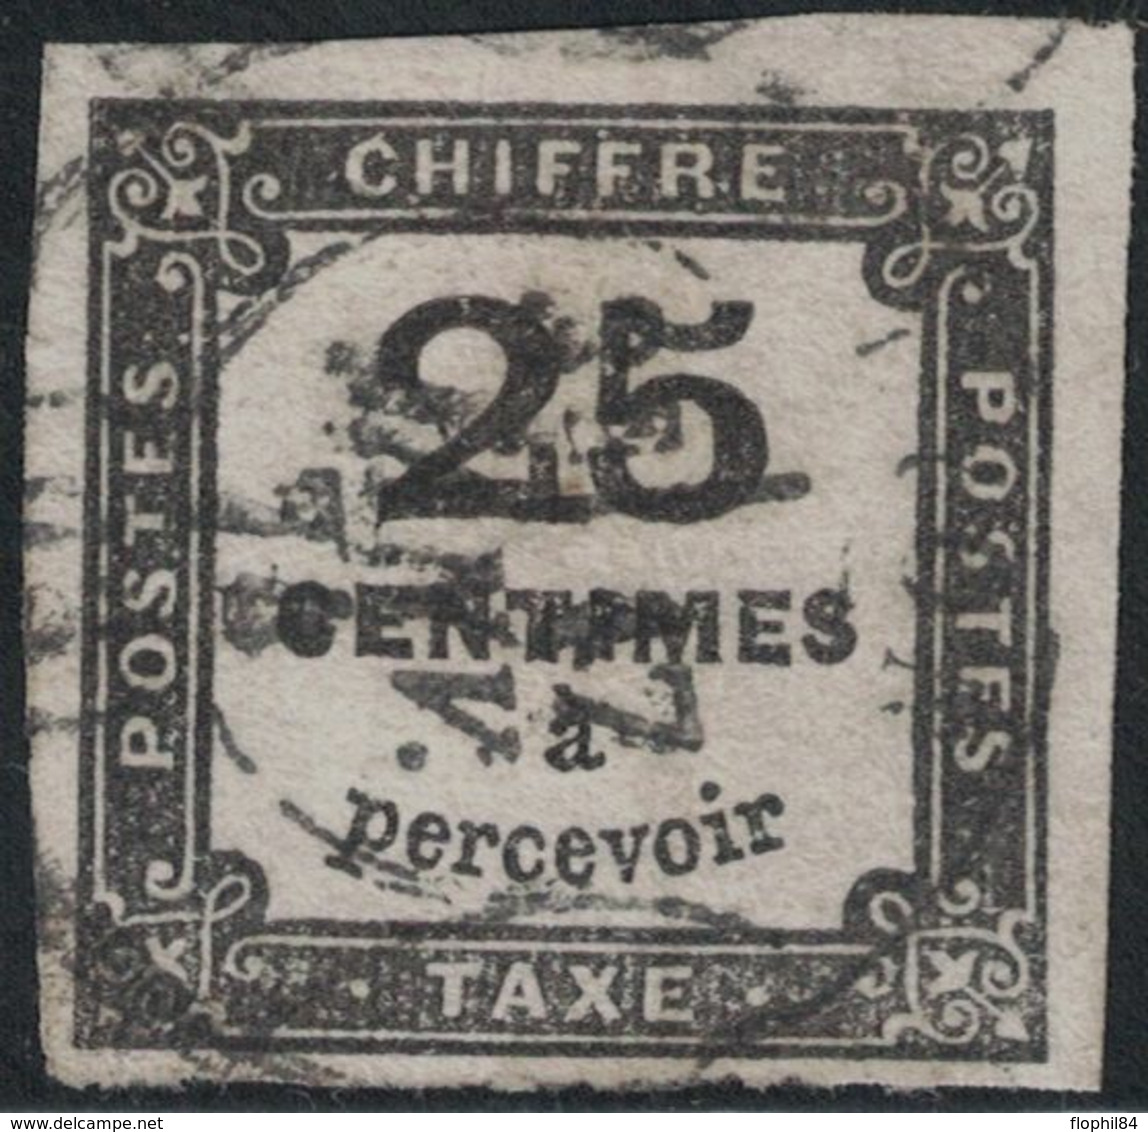 TAXE - N°5 - 25c NOIR - OBLITERATION - CACHET A DATE - COTE 65€ . - 1859-1959 Used